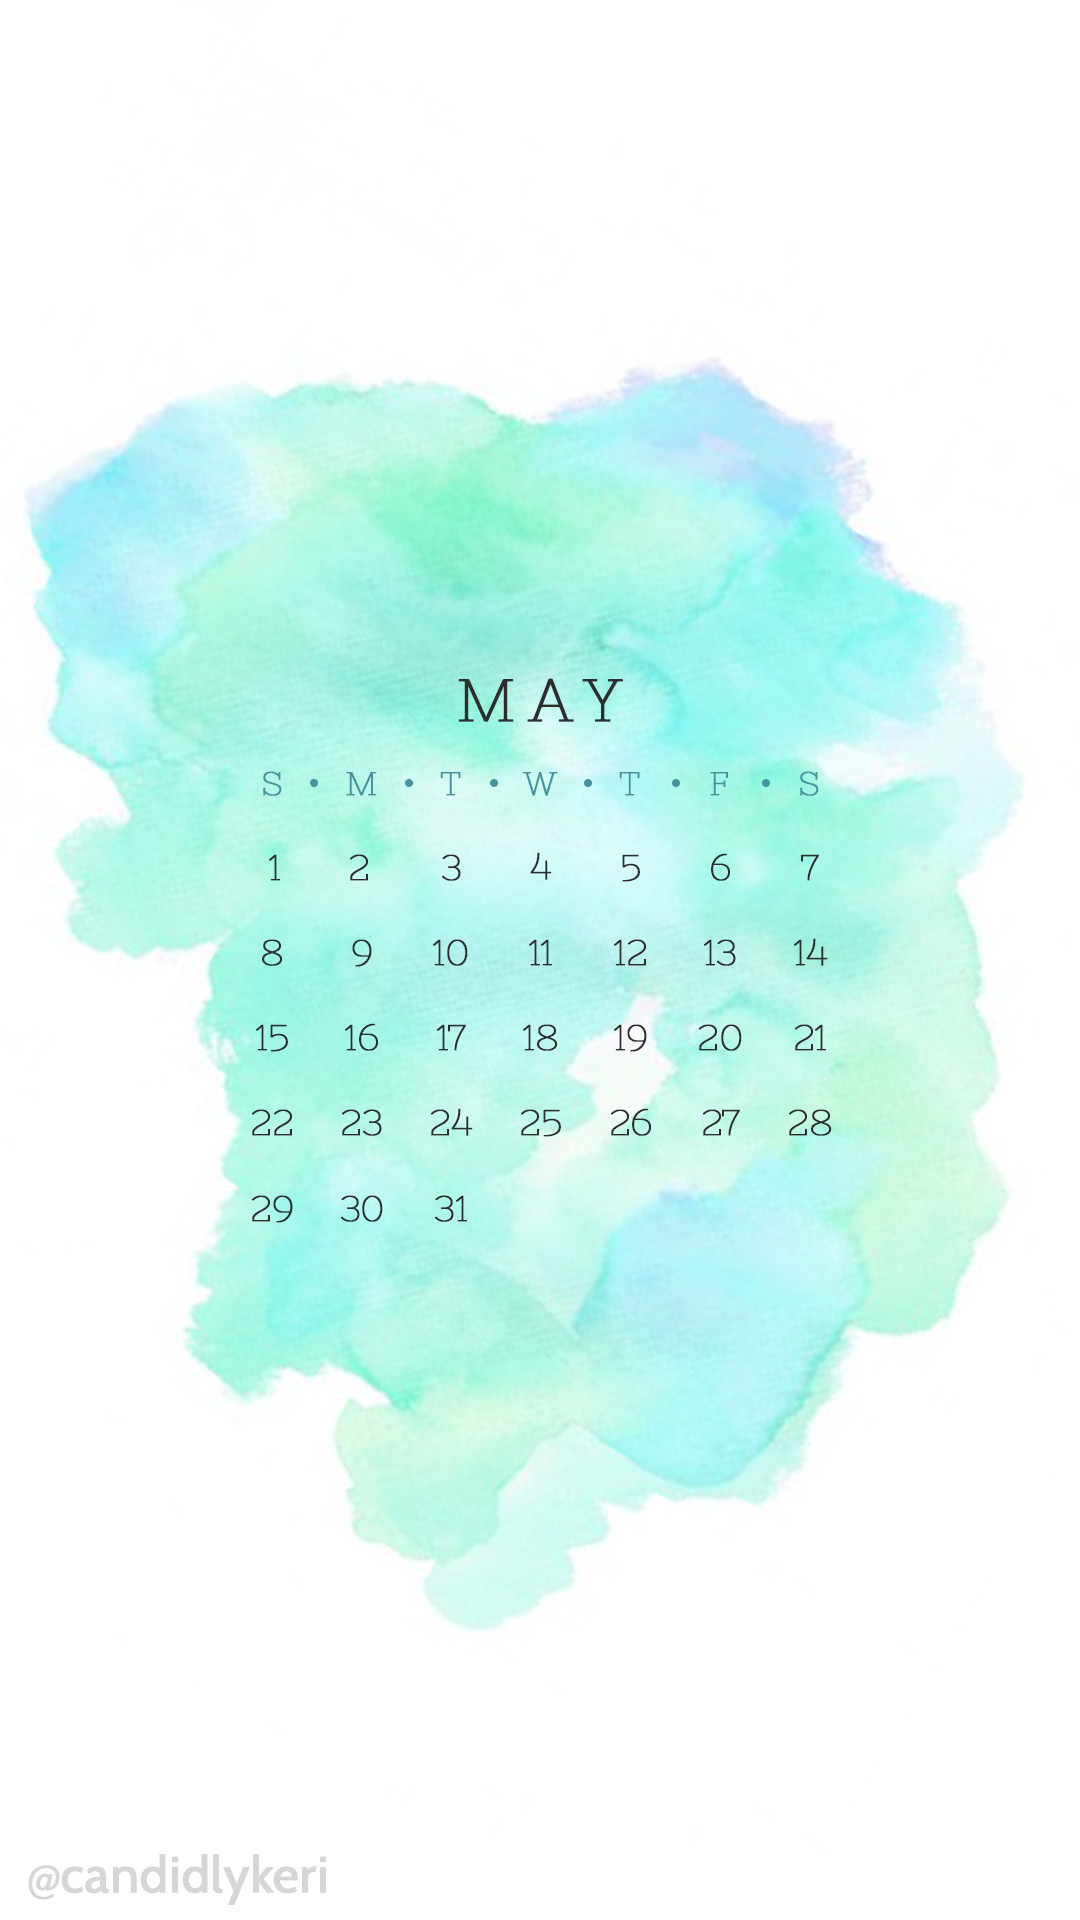 1080x1920 Blue turquoise and green may 2016 calendar wallpaper free download for  iPhone android or desktop background